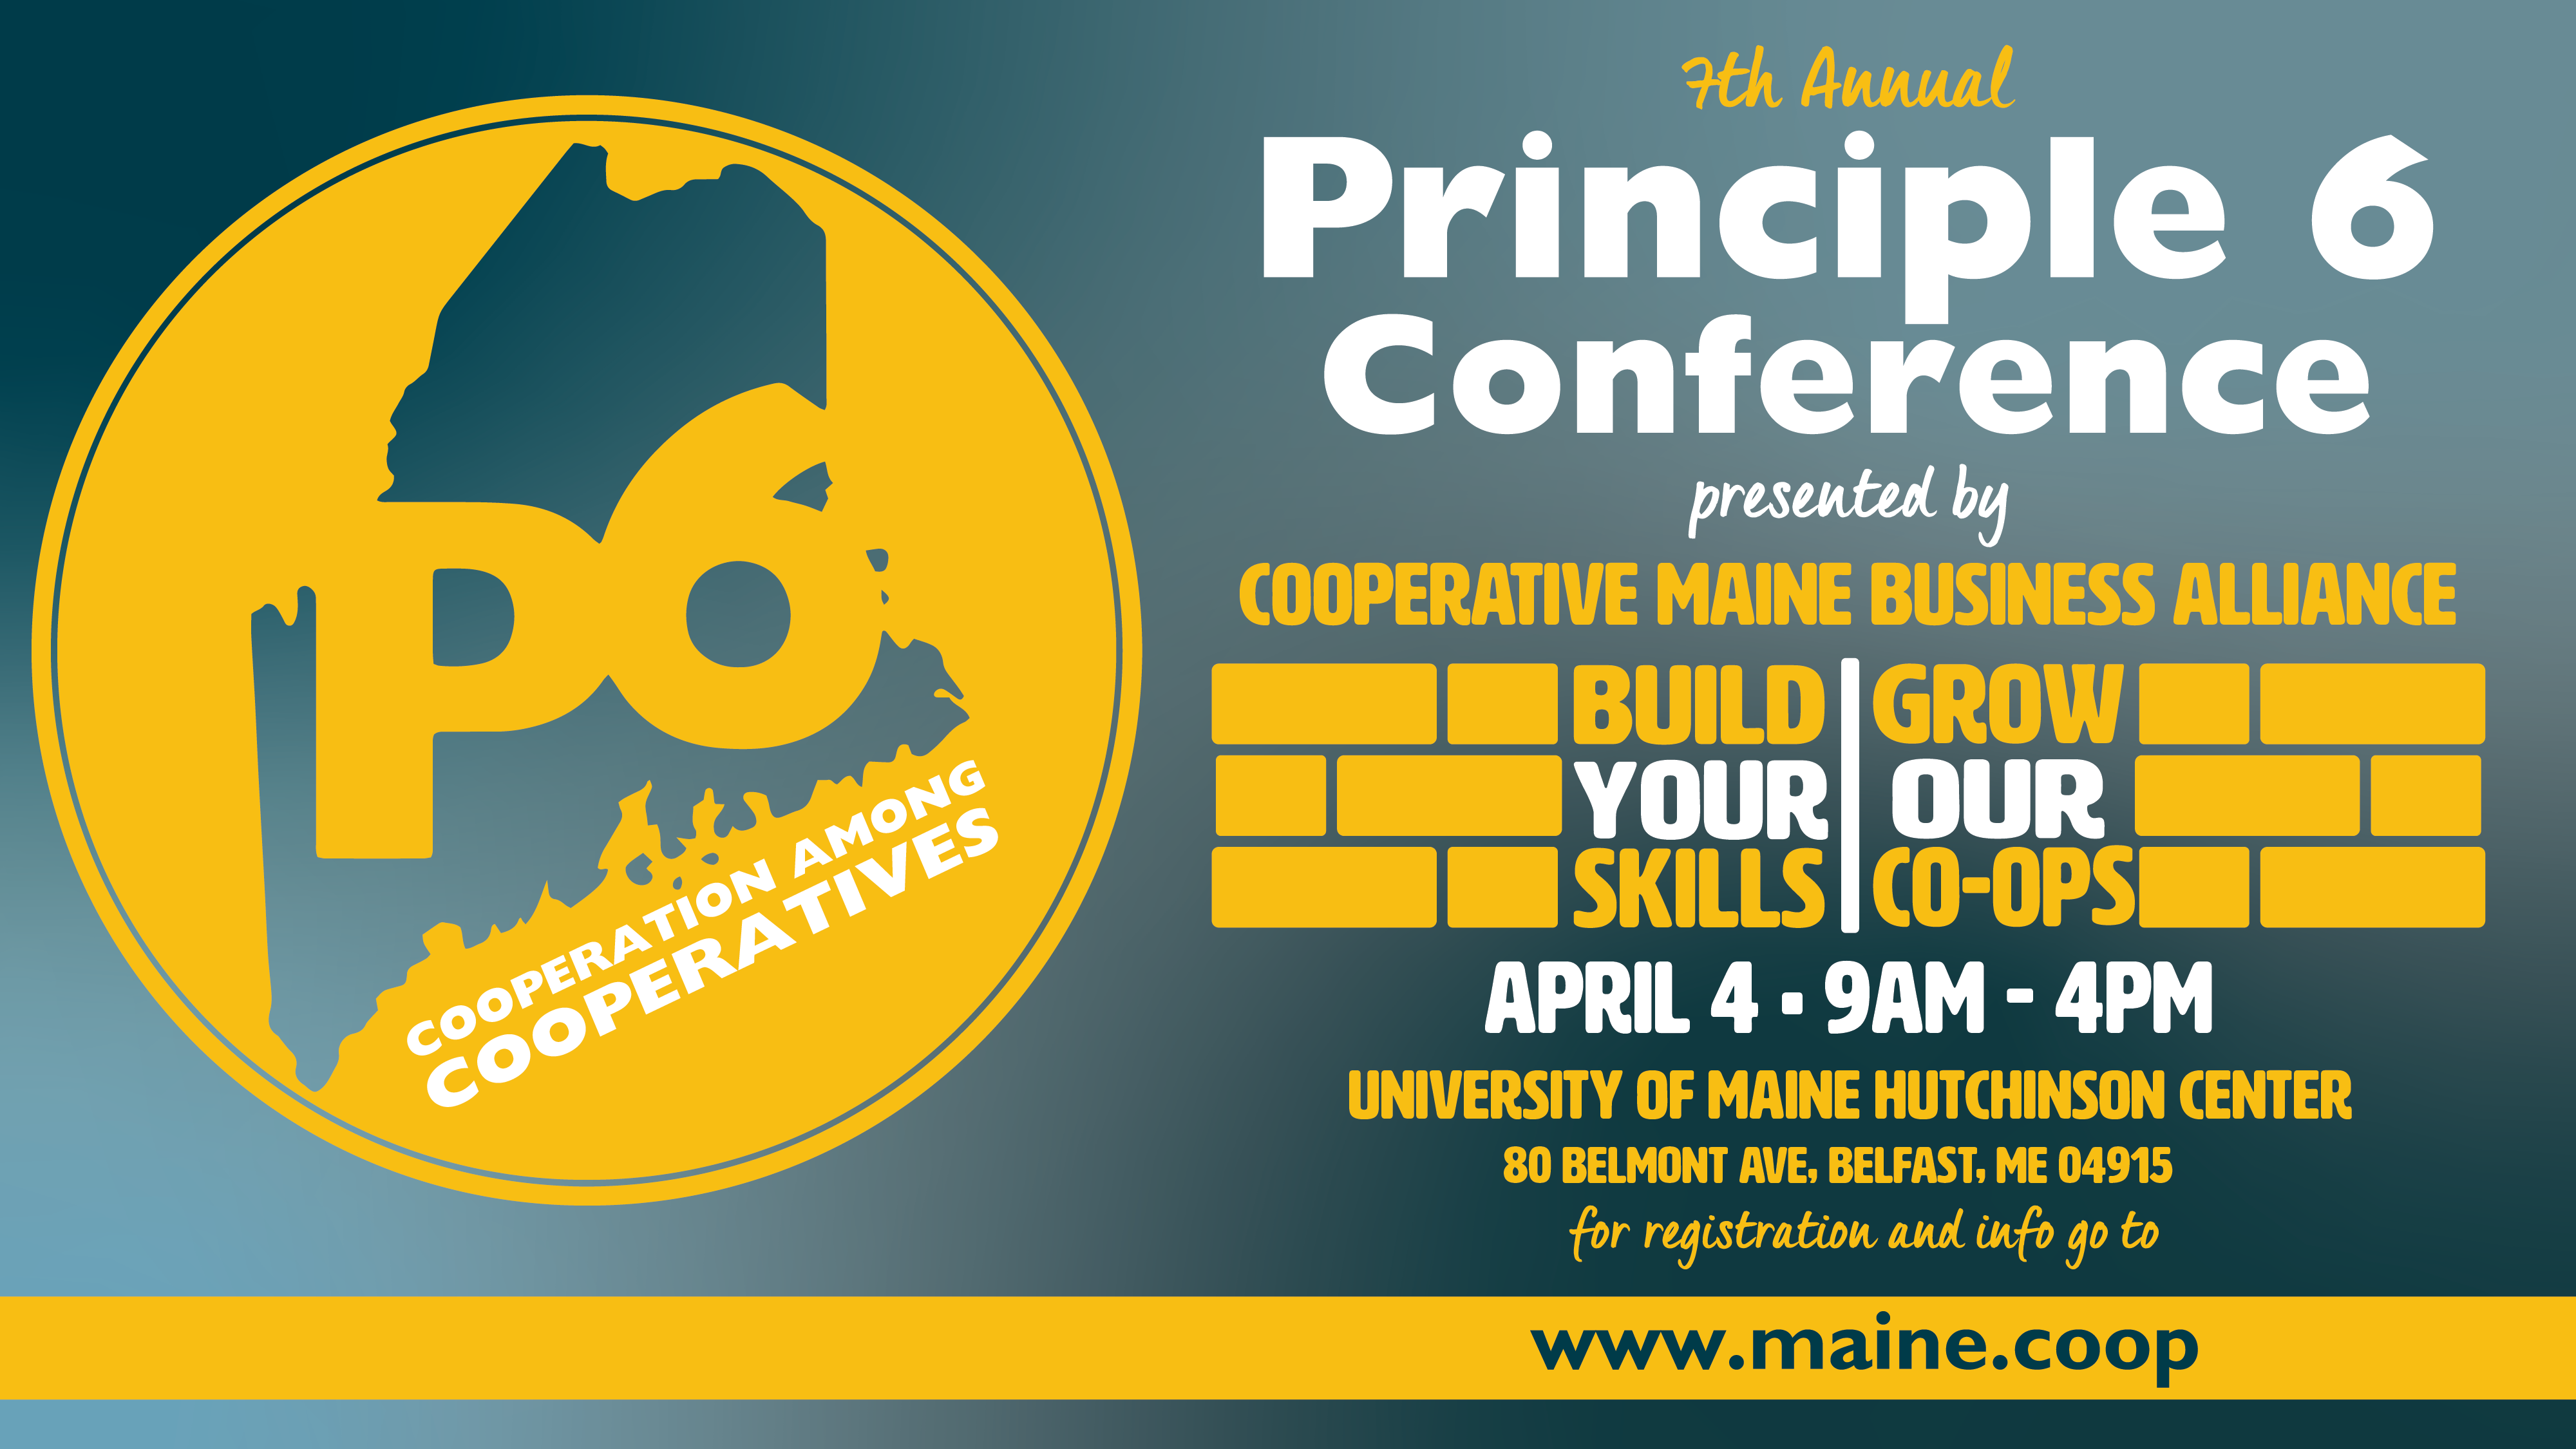 CMBA Principle 6 Conference flyer